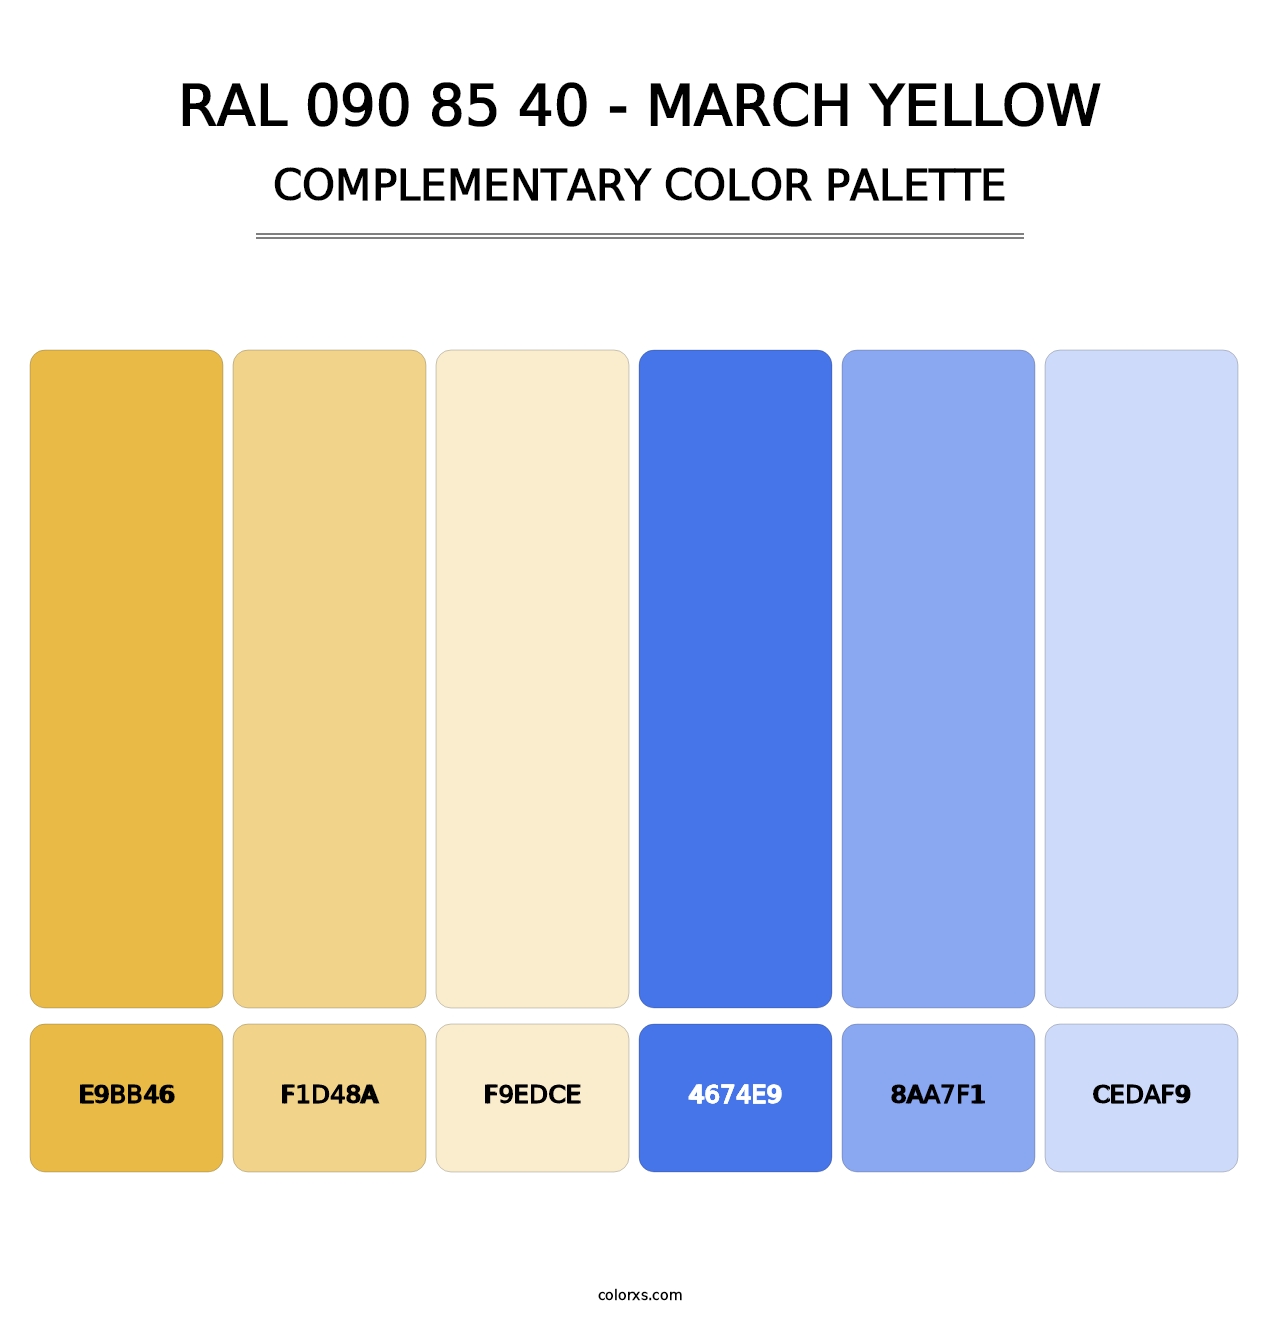 RAL 090 85 40 - March Yellow - Complementary Color Palette